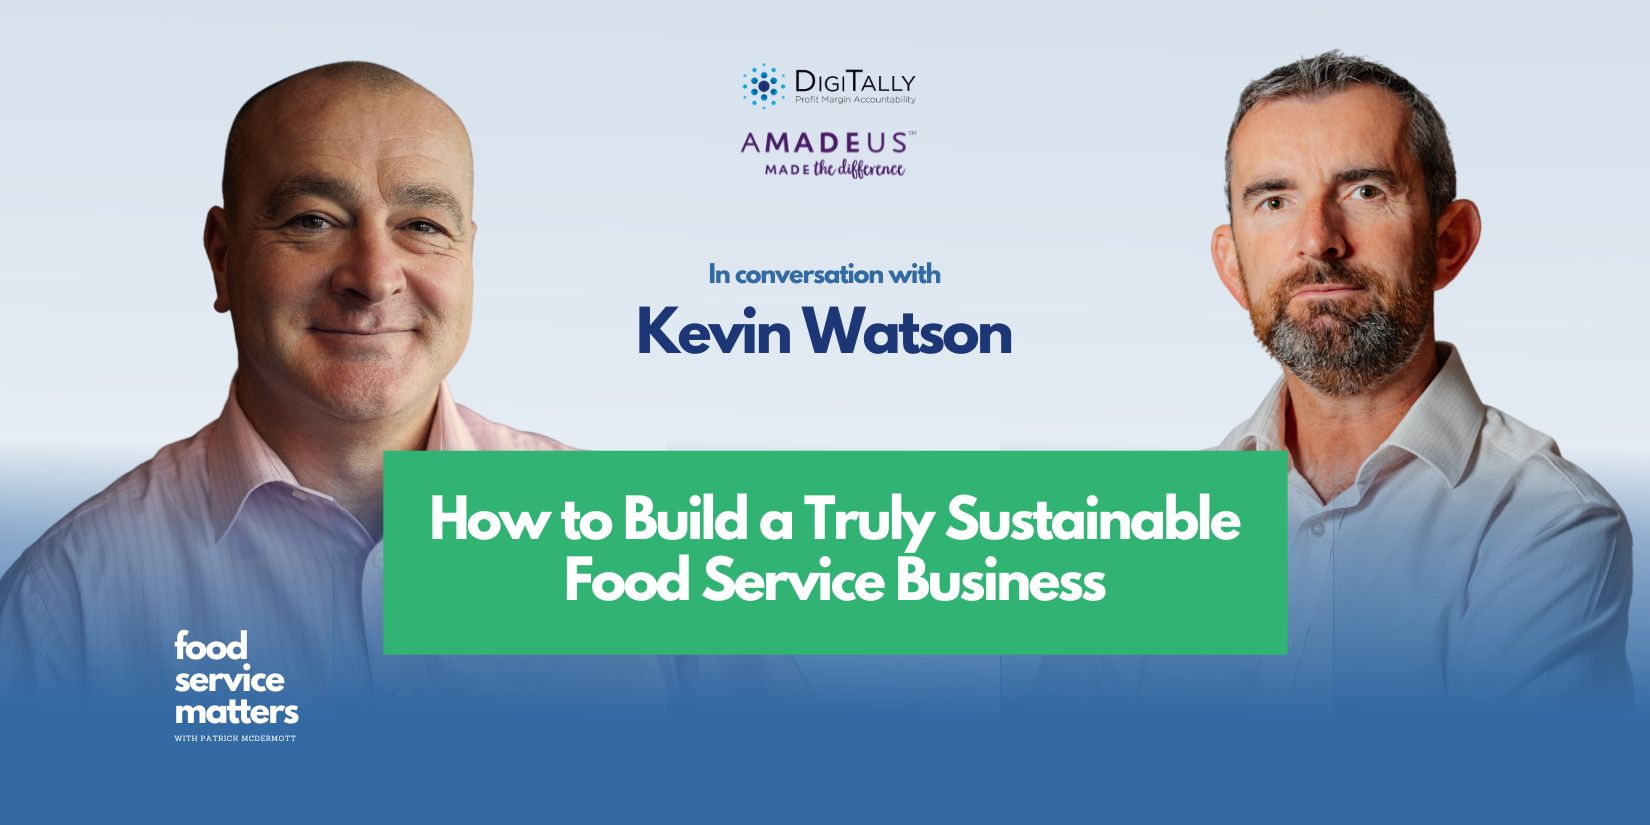 How to Build a Truly Sustainable Food Service Business